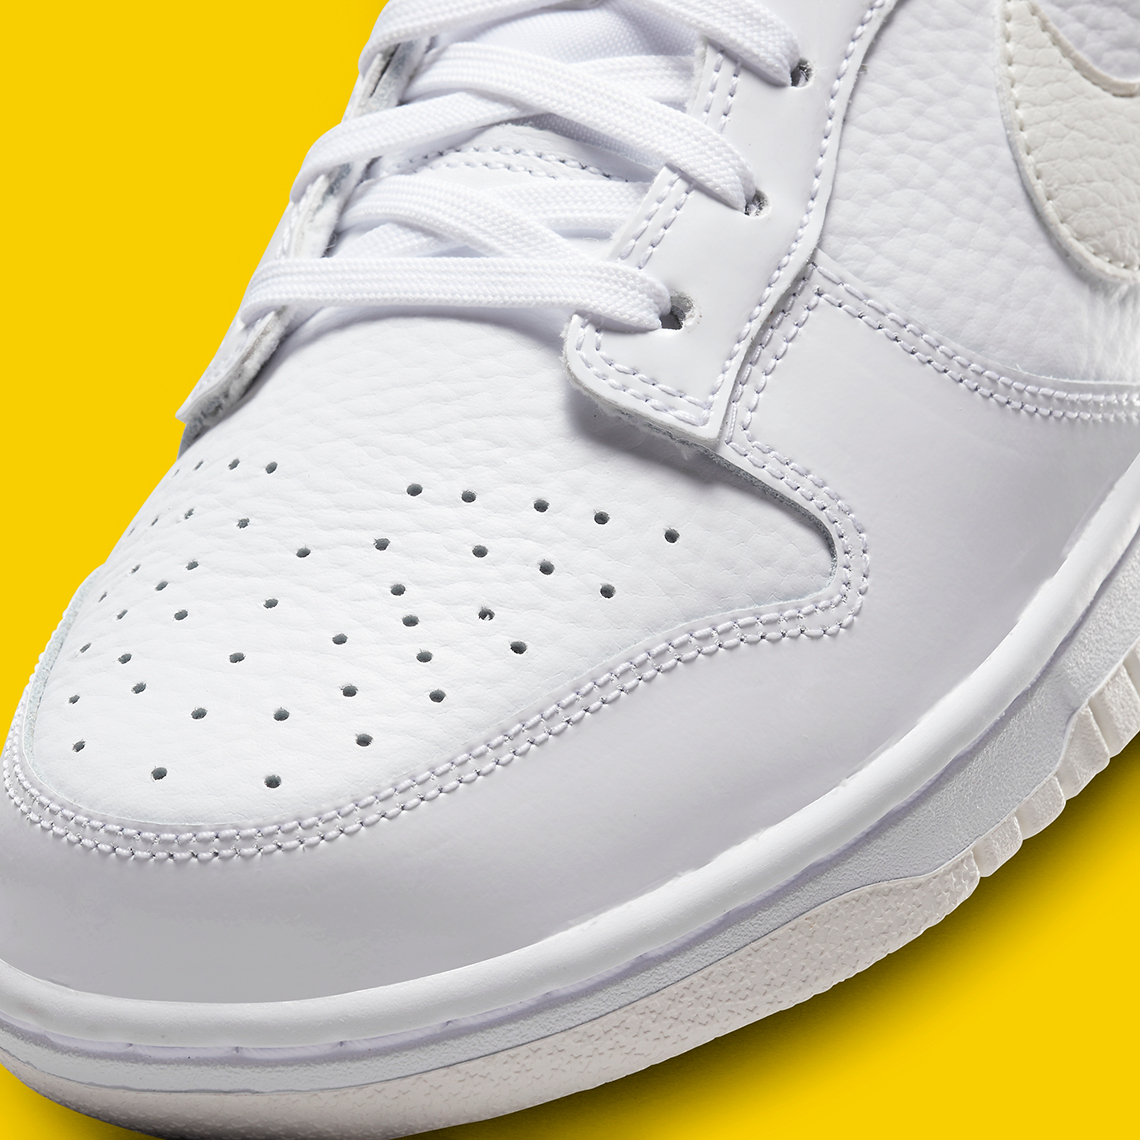 Drakes long-awaited Nike Air Force 1 sneaker collaboration may finally be hitting retail soon White Yellow Heart Fd0803 100 4